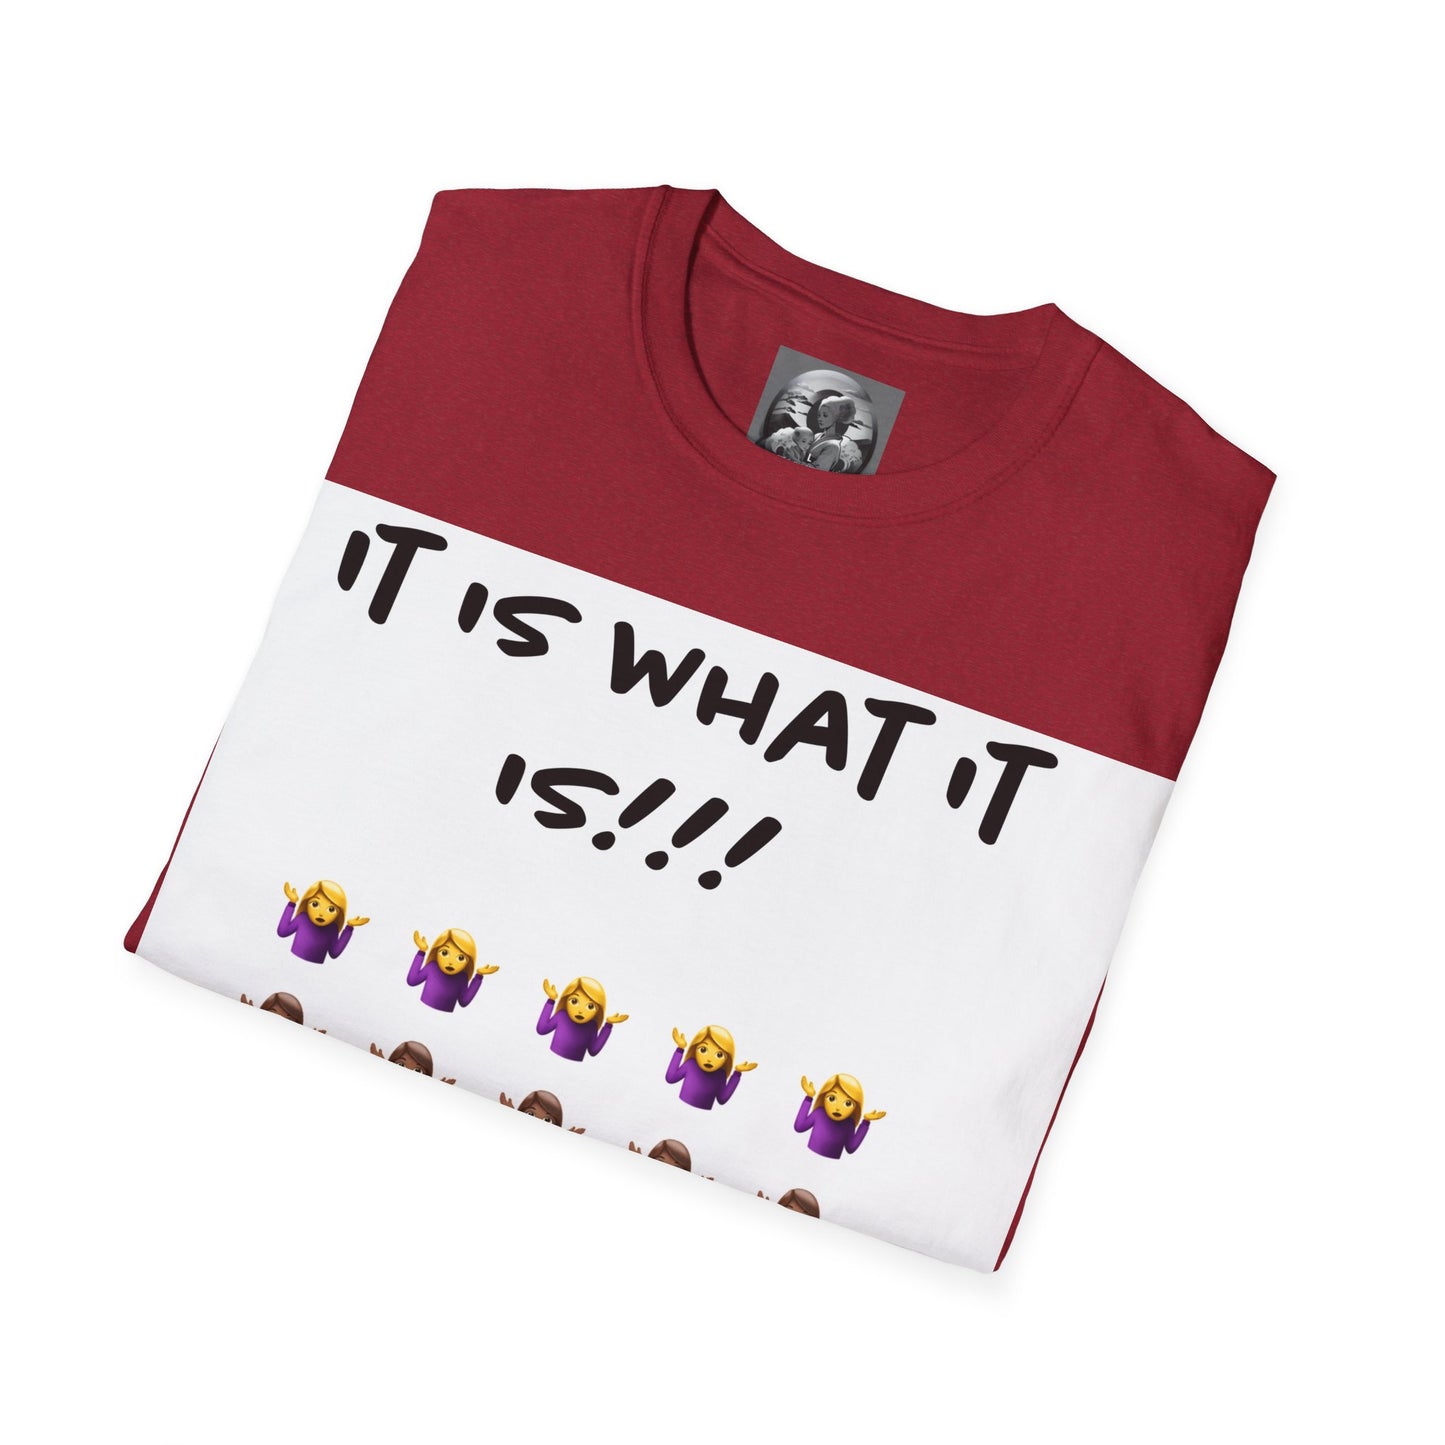 "It is what it is female" Single Print Unisex Softstyle T-Shirt